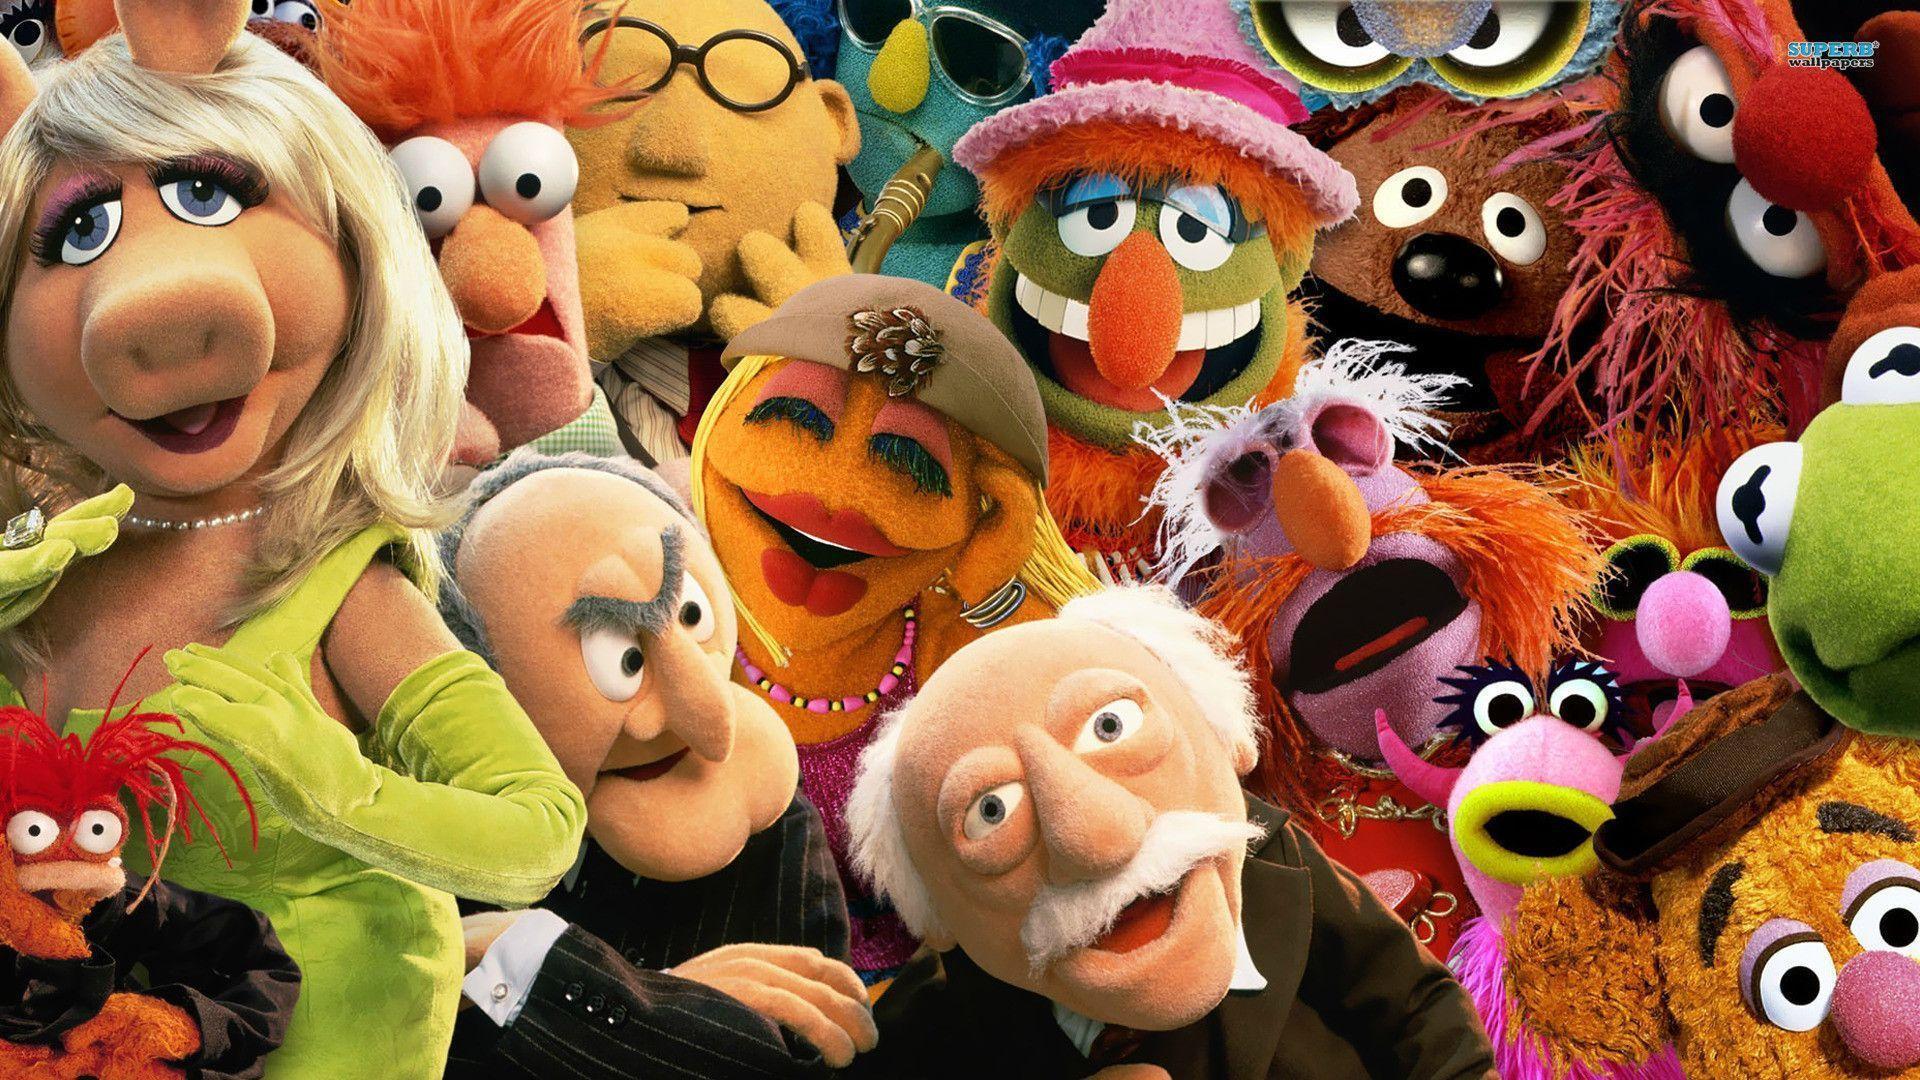 The Muppets Theme Song. Movie Theme Songs & TV Soundtracks